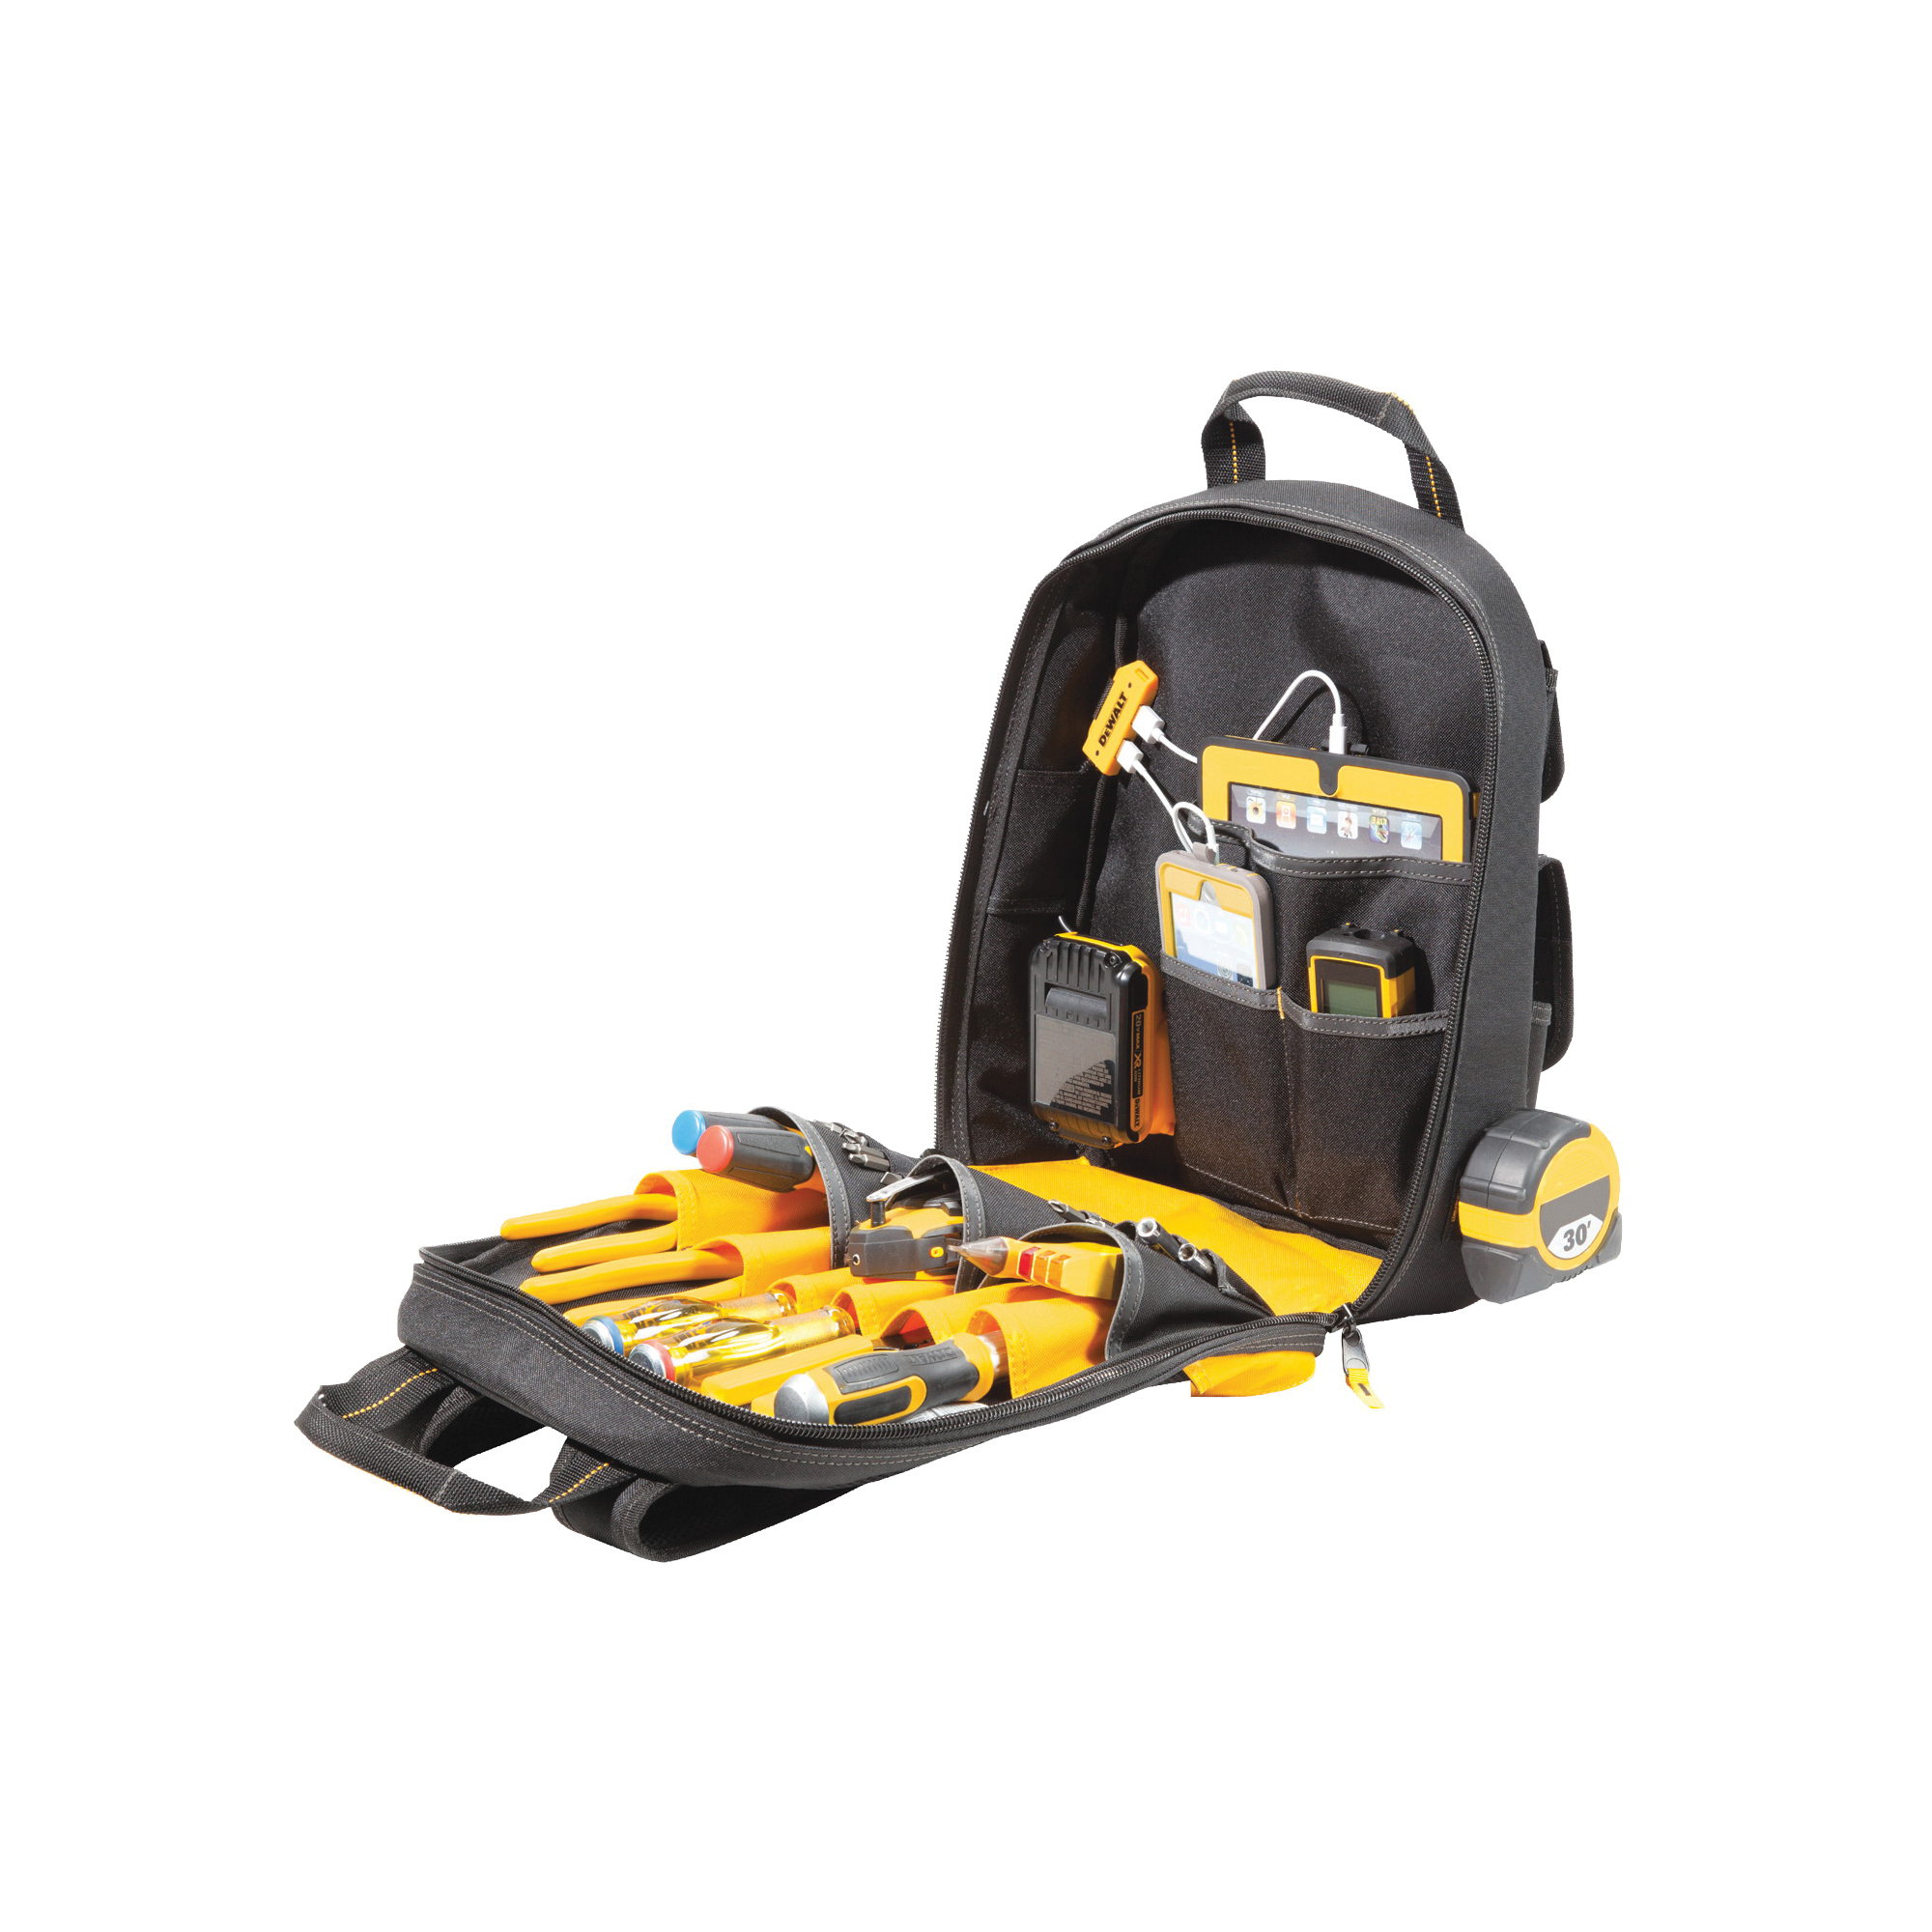 DGC530 Tool Backpack with USB Charging, 13 in W, 5-1/2 in D, 16 in H, 23-Pocket, Polyester, Black/Yellow